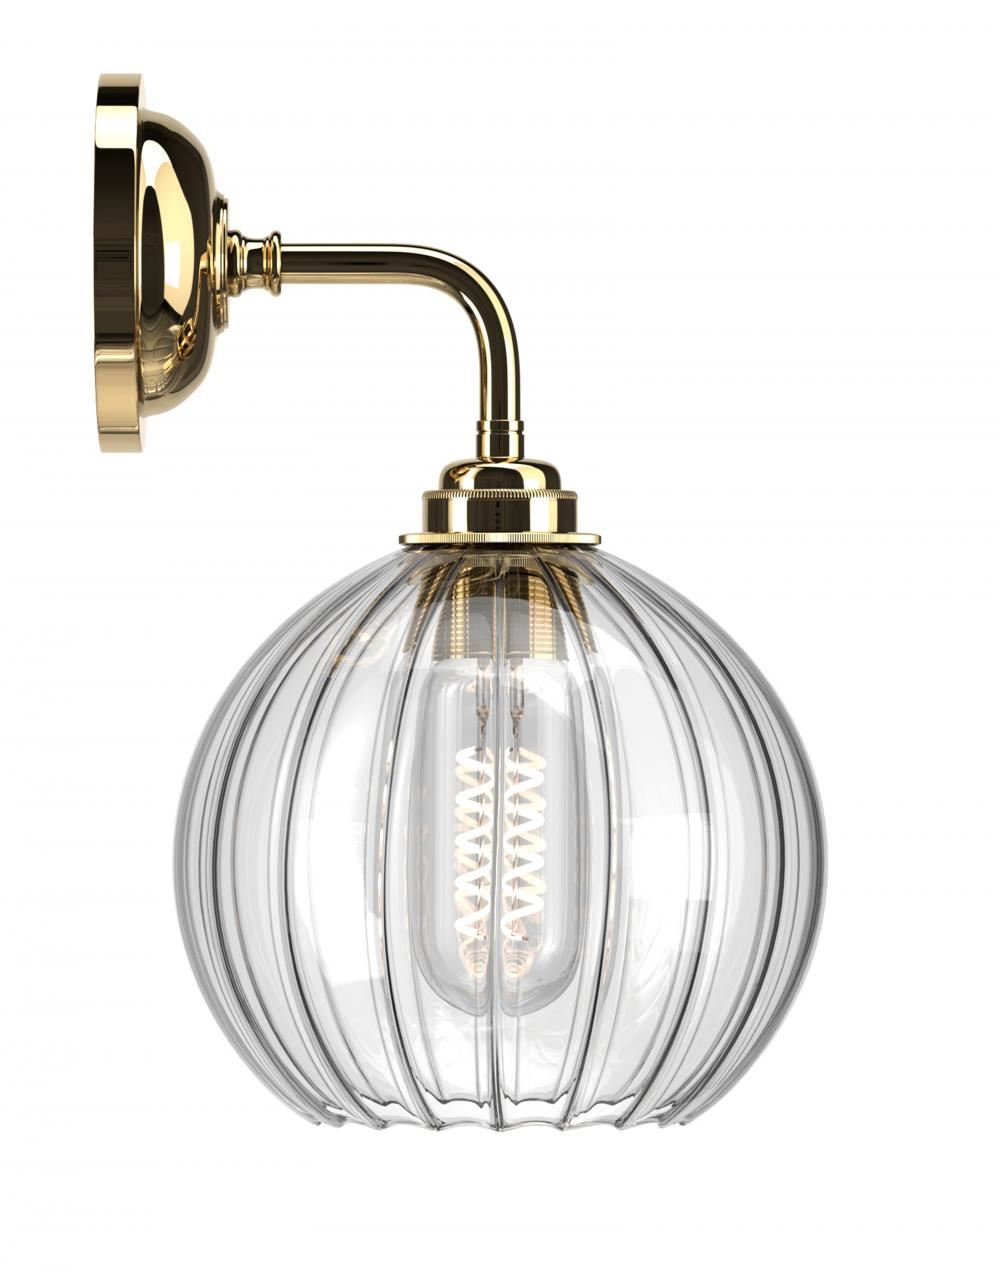 Hereford Bathroom Wall Light Ribbed Polished Brass